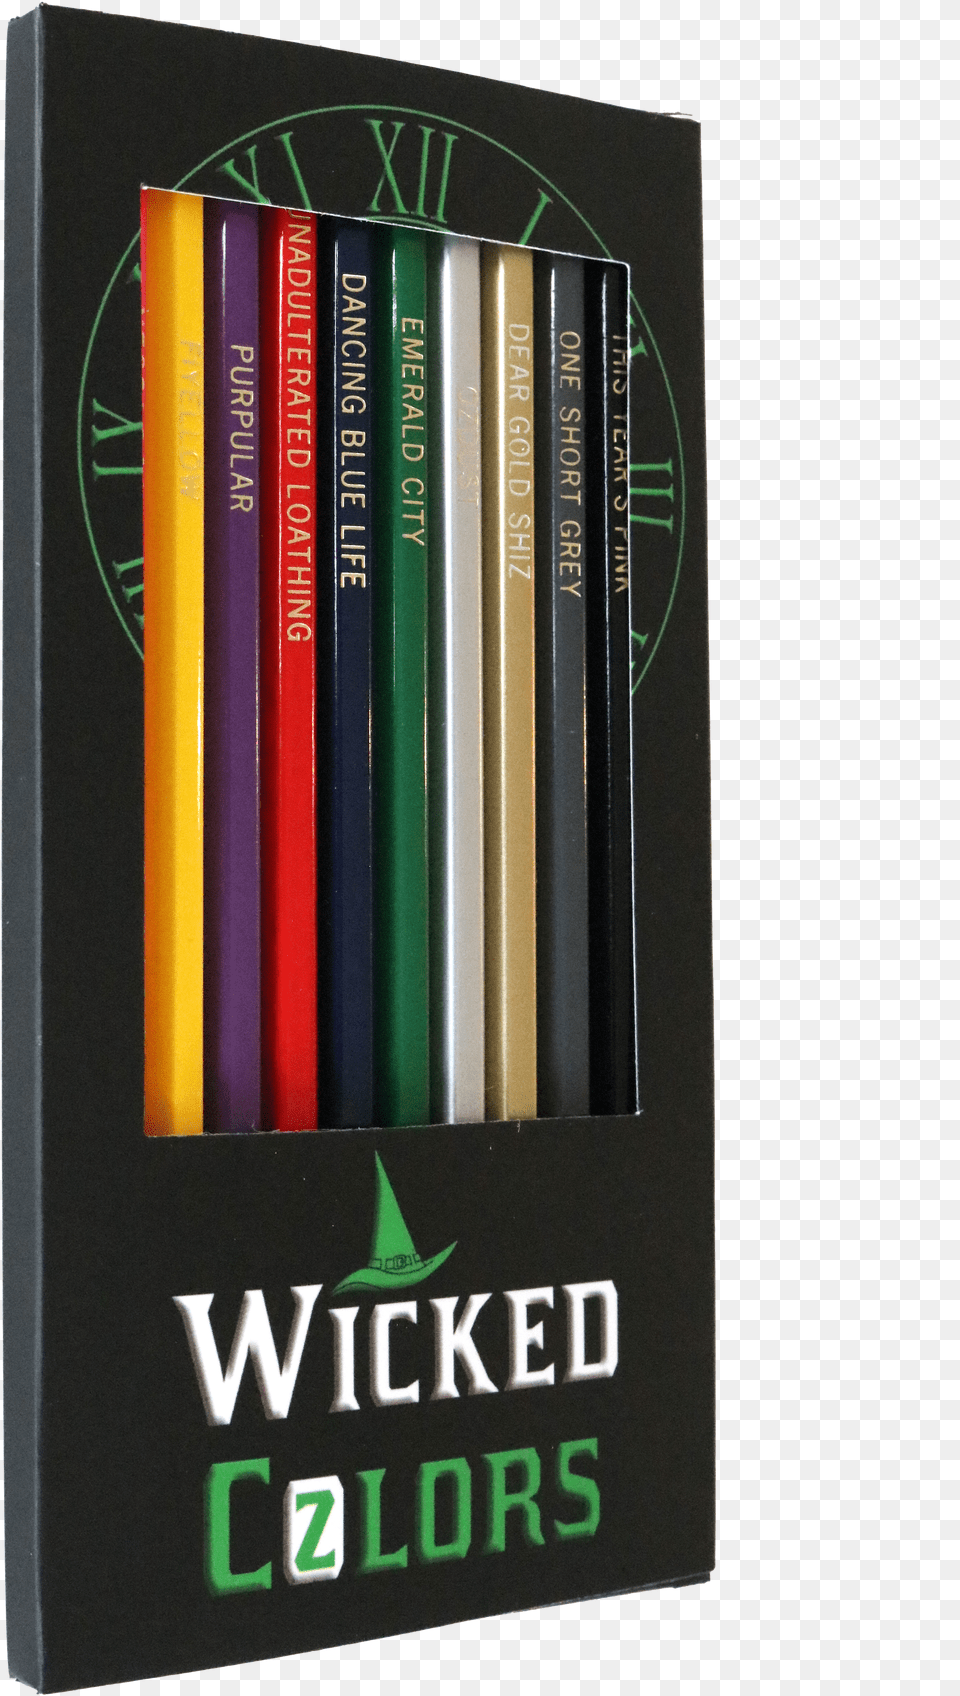 Wicked Colored Pencils Are Here Book Cover, Accessories, Jewelry, Cap, Clothing Png